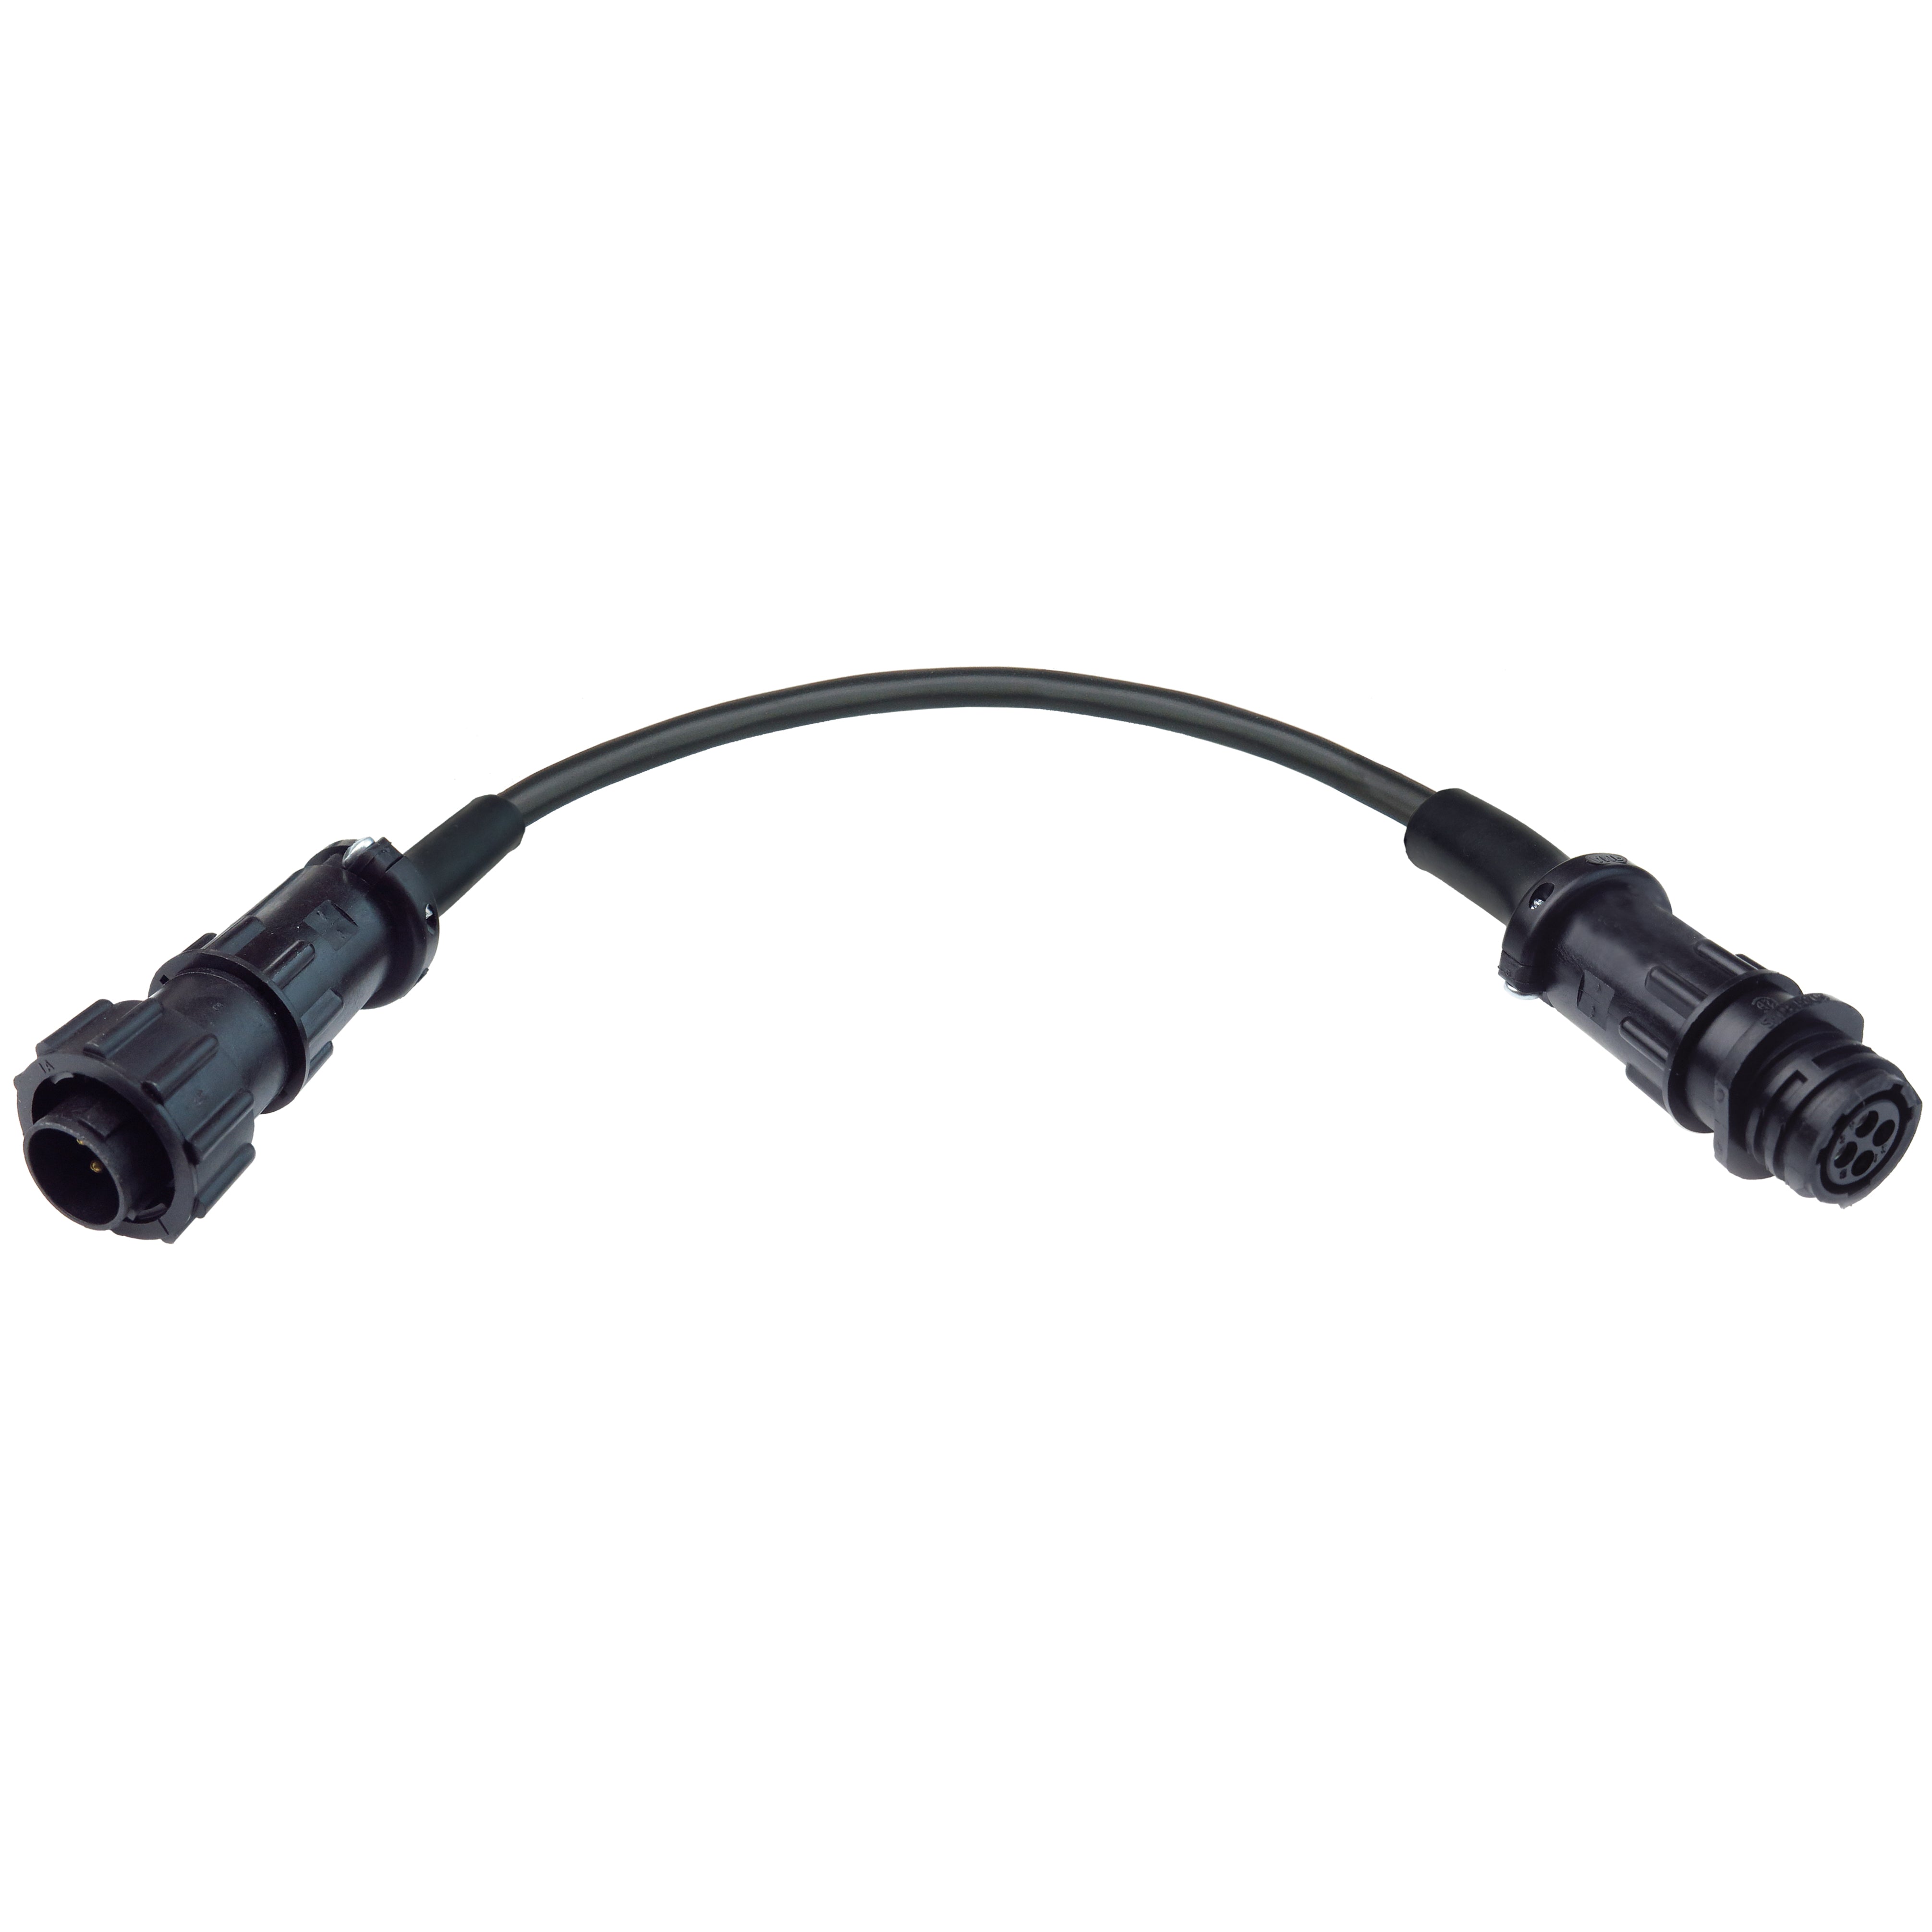 (05) 4 Pin AMP Extension Cable